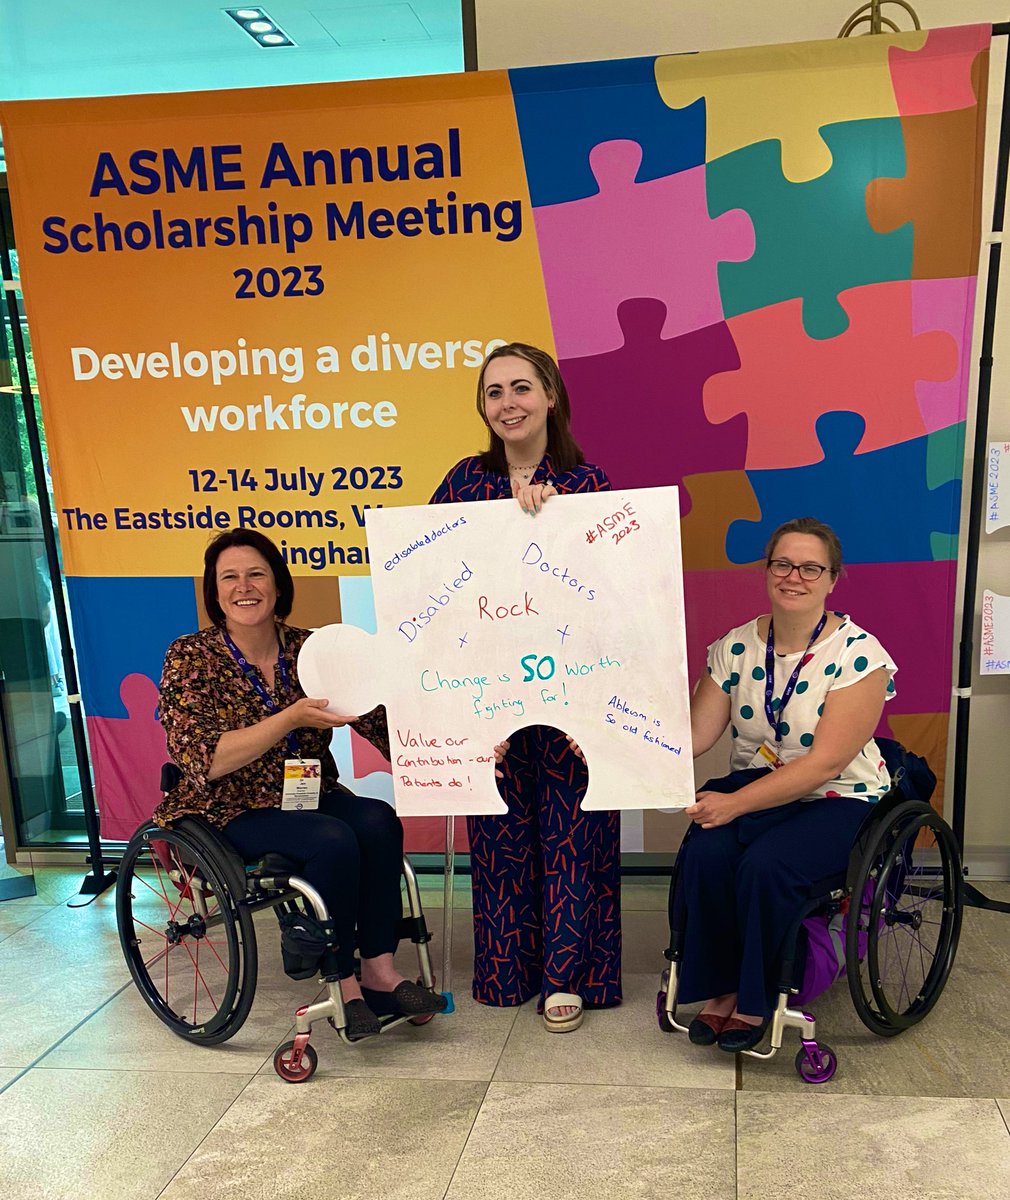 Fab day at #ASME2023 flying the flag for @disableddoctors with Dr Caroline Bonner. Lovely to hear some powerful voices driving change and challenging ableism in Medicine